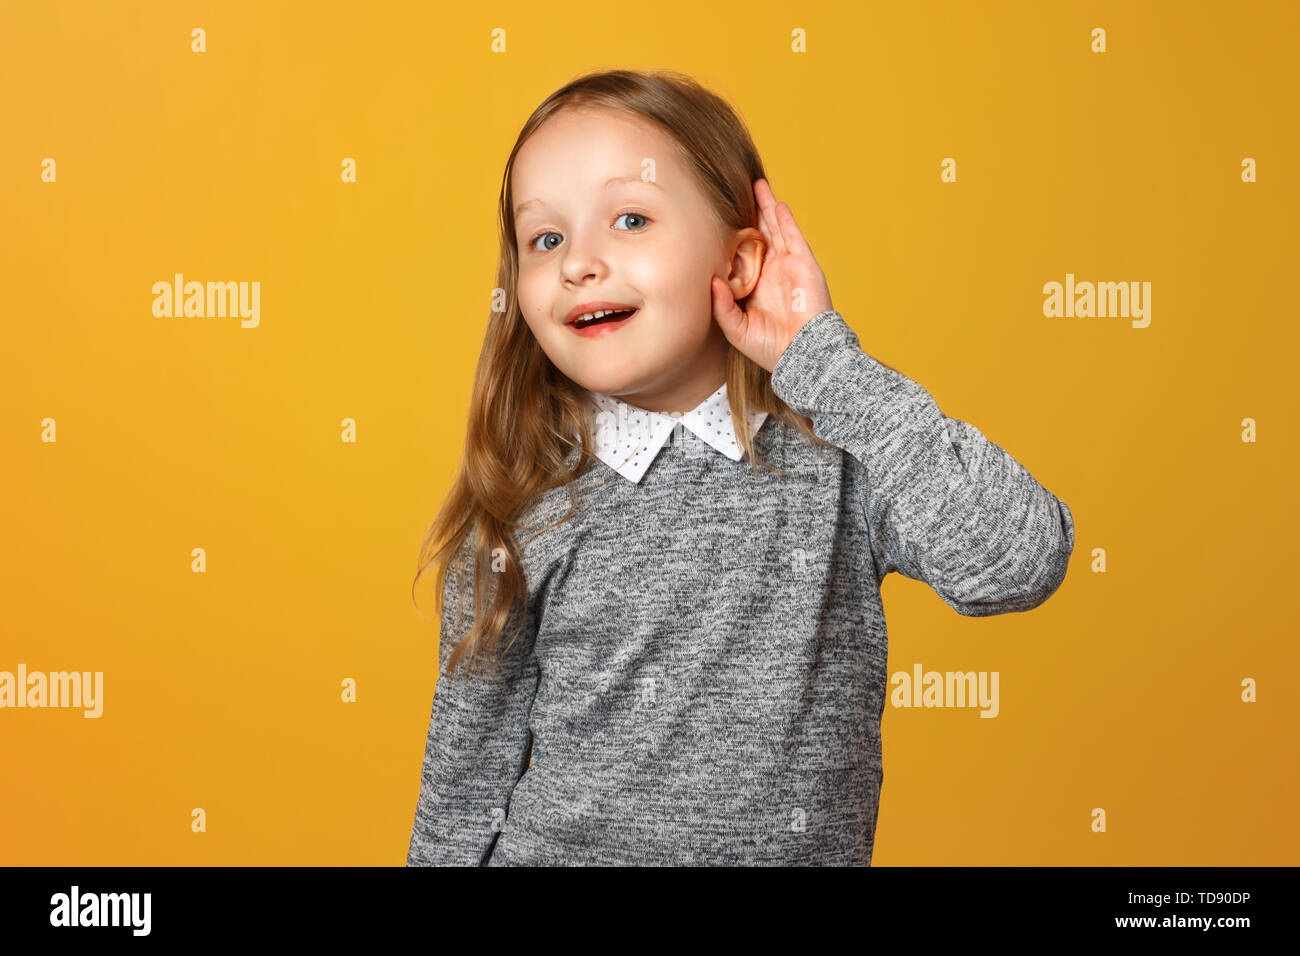 The little girl puts her hand to her ear to hear better. The child is listening to something on a yellow background. Stock Photo